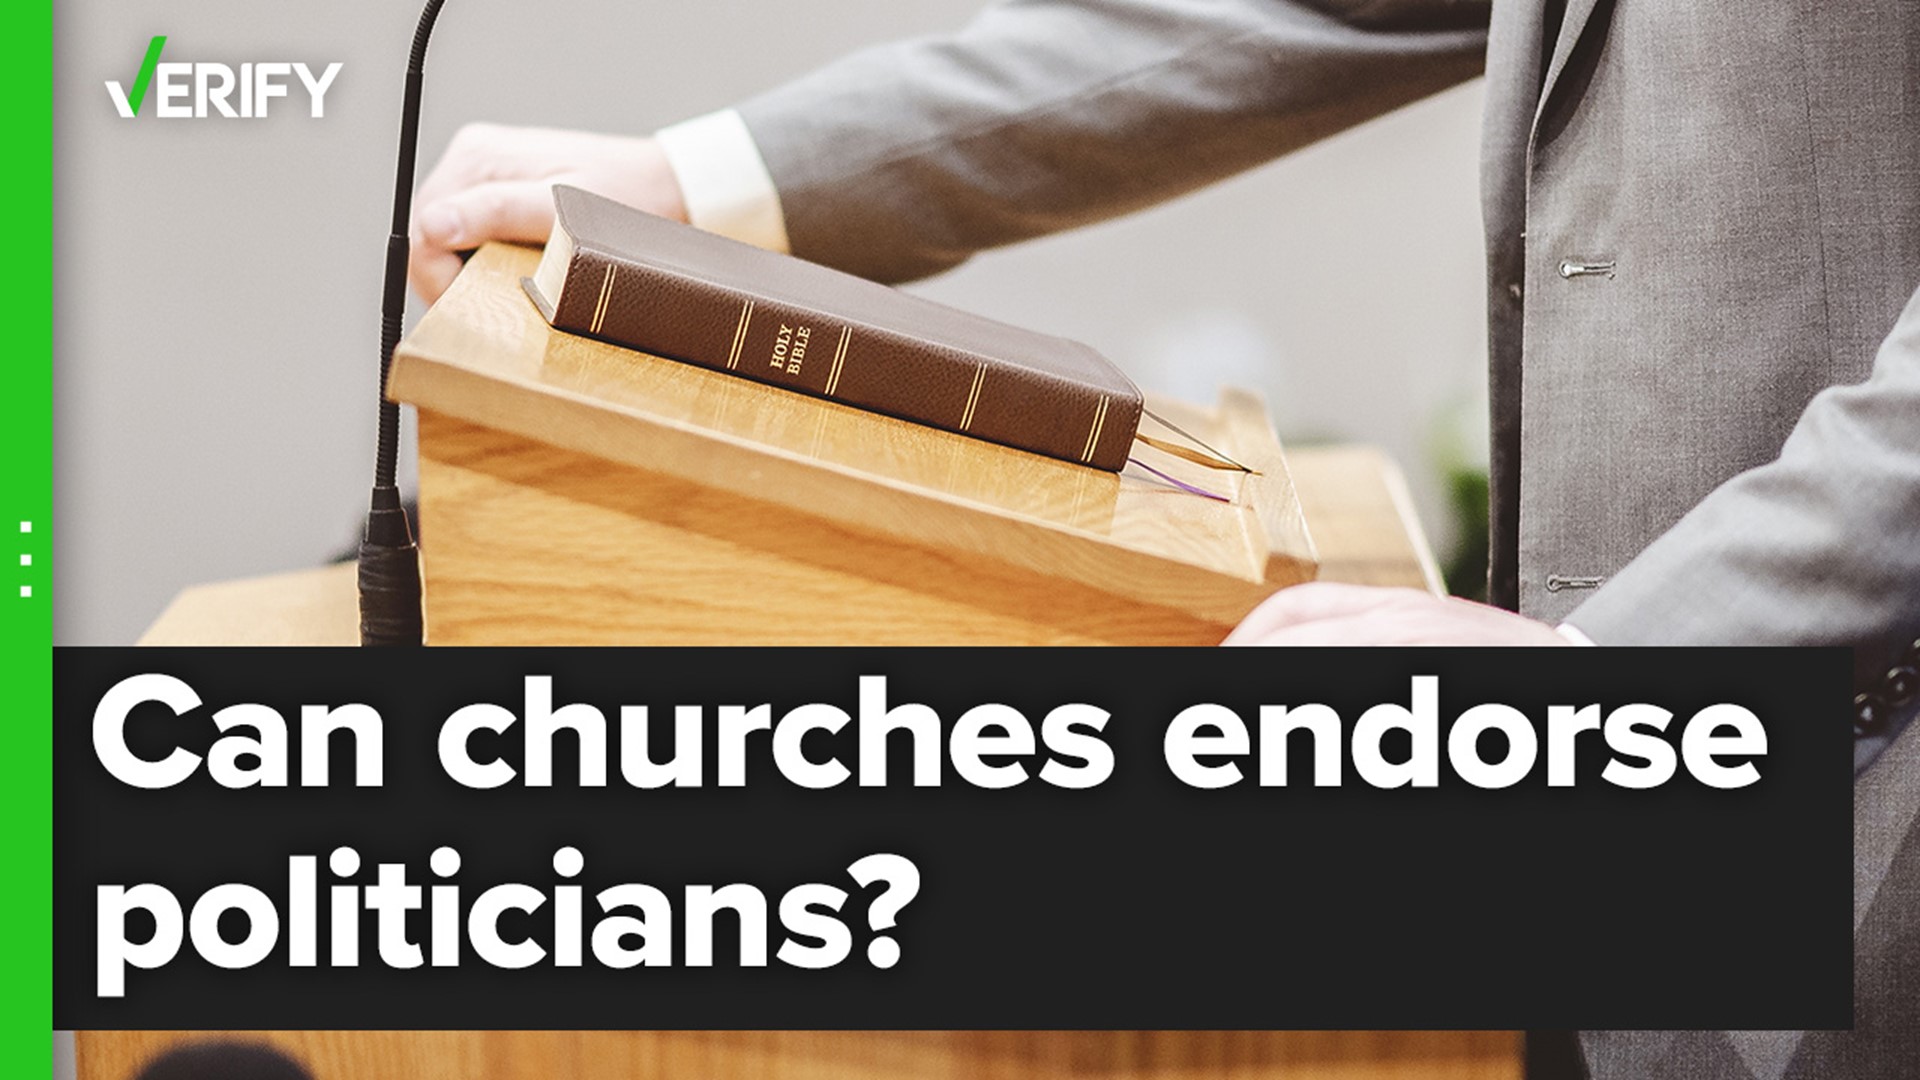 Churches and charities that are defined as tax-exempt organizations by the IRS are prohibited from endorsing political candidates.